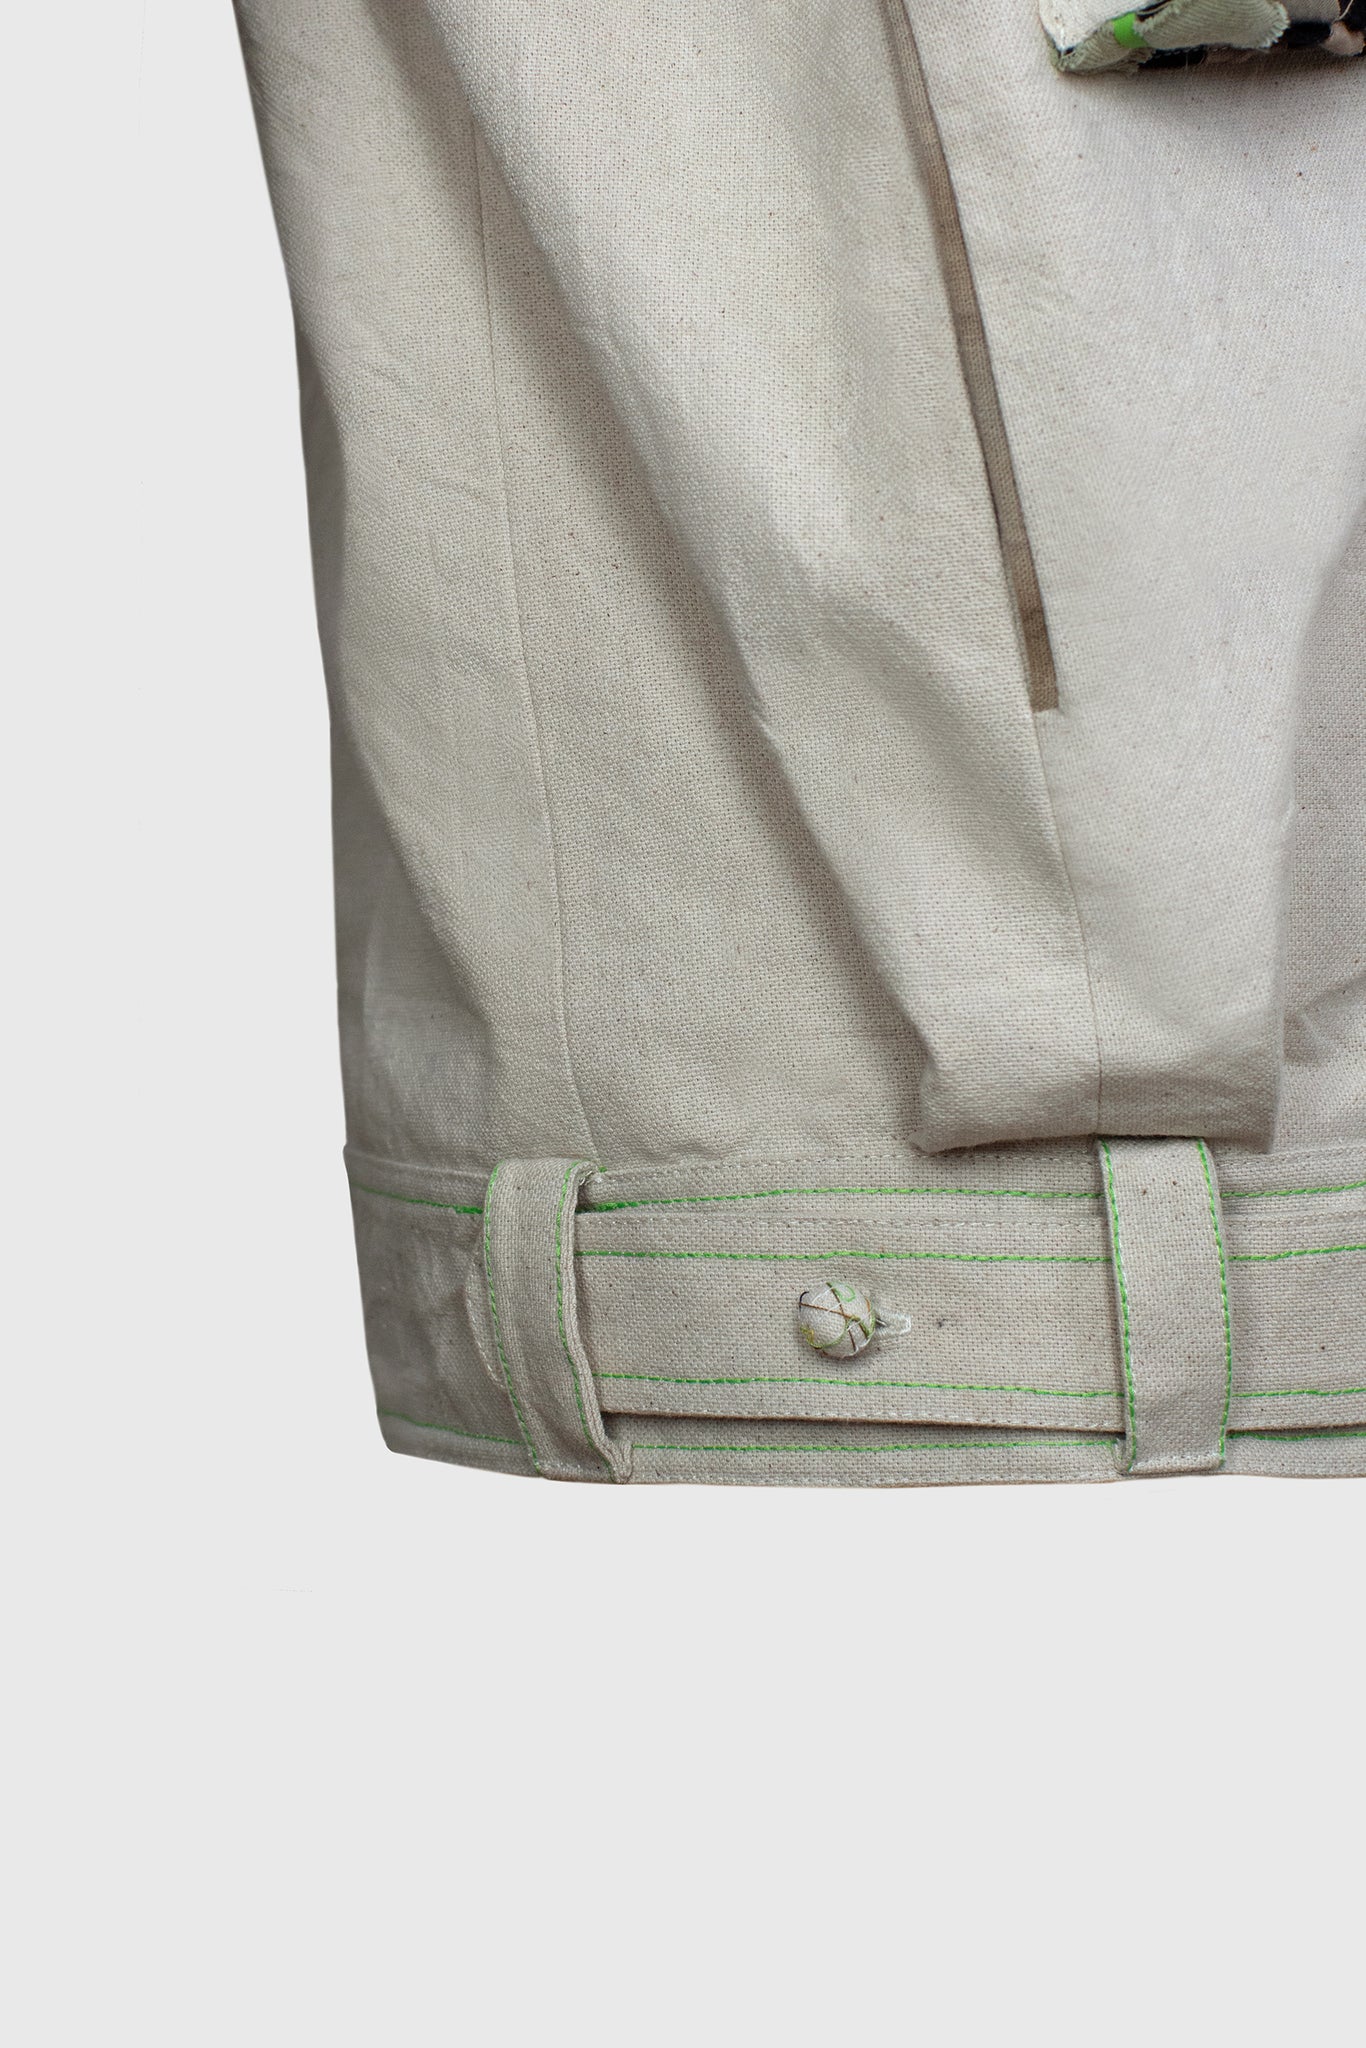 detail of a Fench seam on side pocket, bomber jacket with belt around waist, high end well made fashion